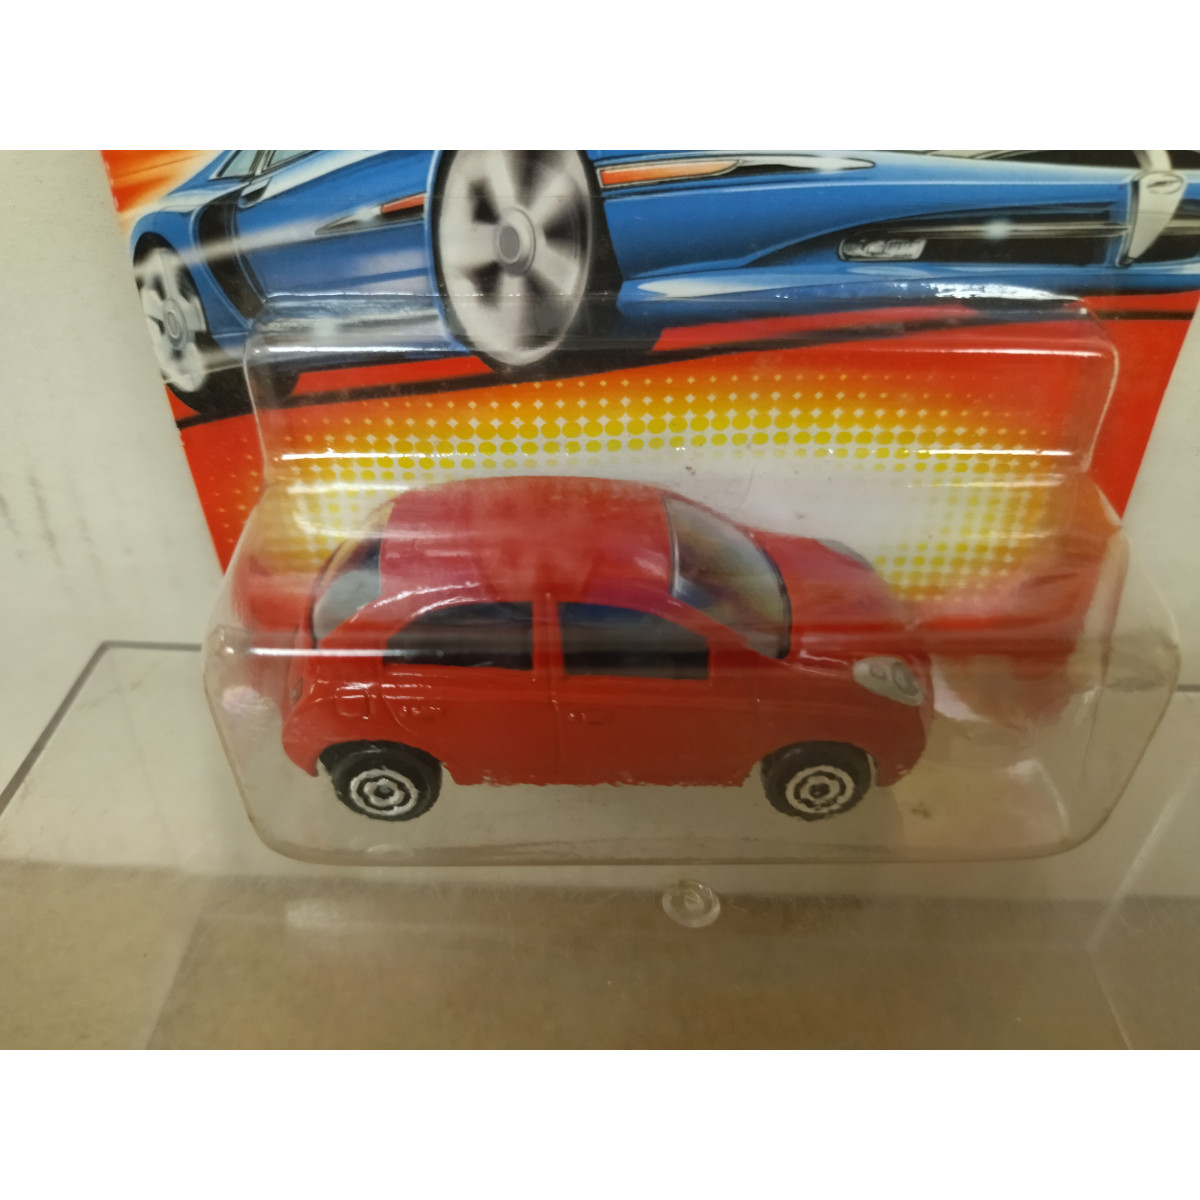 NISSAN MICRA 2003 RED 1:58/apx 1:64 MAJORETTE 214A COLLECTOR - BCN STOCK  CARS